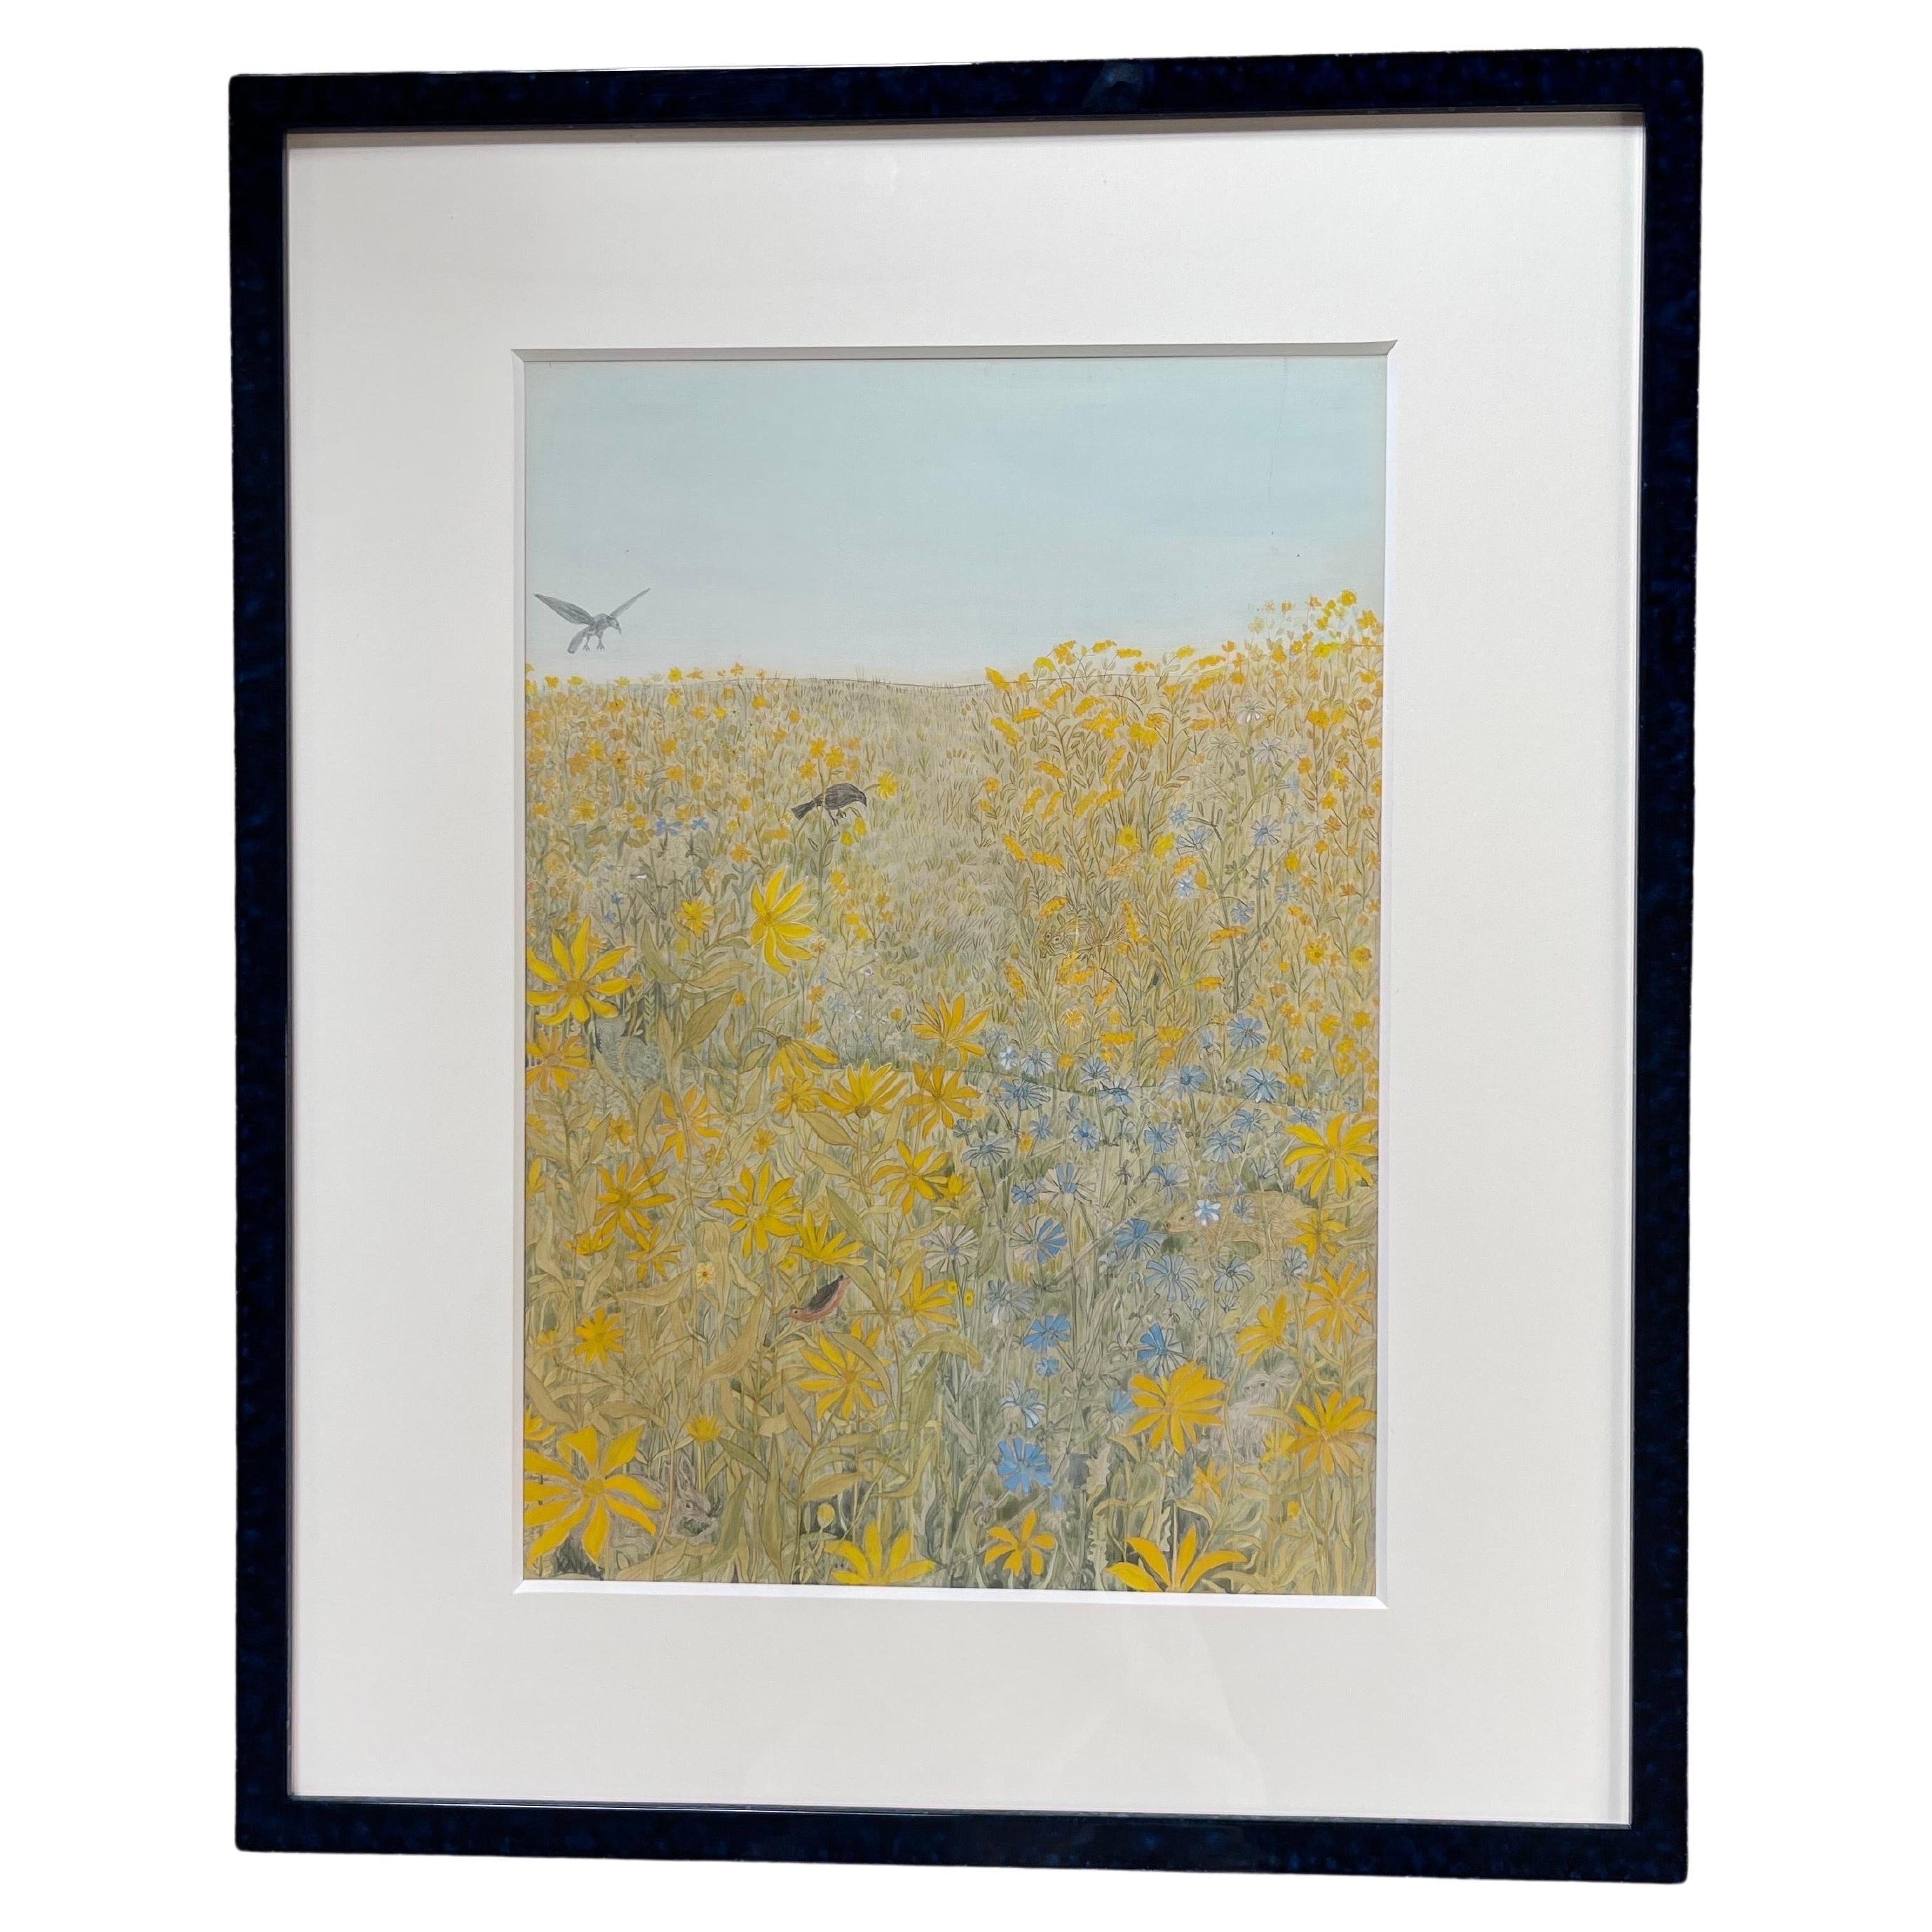 This vivid oil, watercolor and pencil on board by Ilonka Karasz is one of her 186 commissioned cover illustrations for the New Yorker, and the only one currently on the market. 

Looking closely at the scene of wild spring flora, you’ll see a